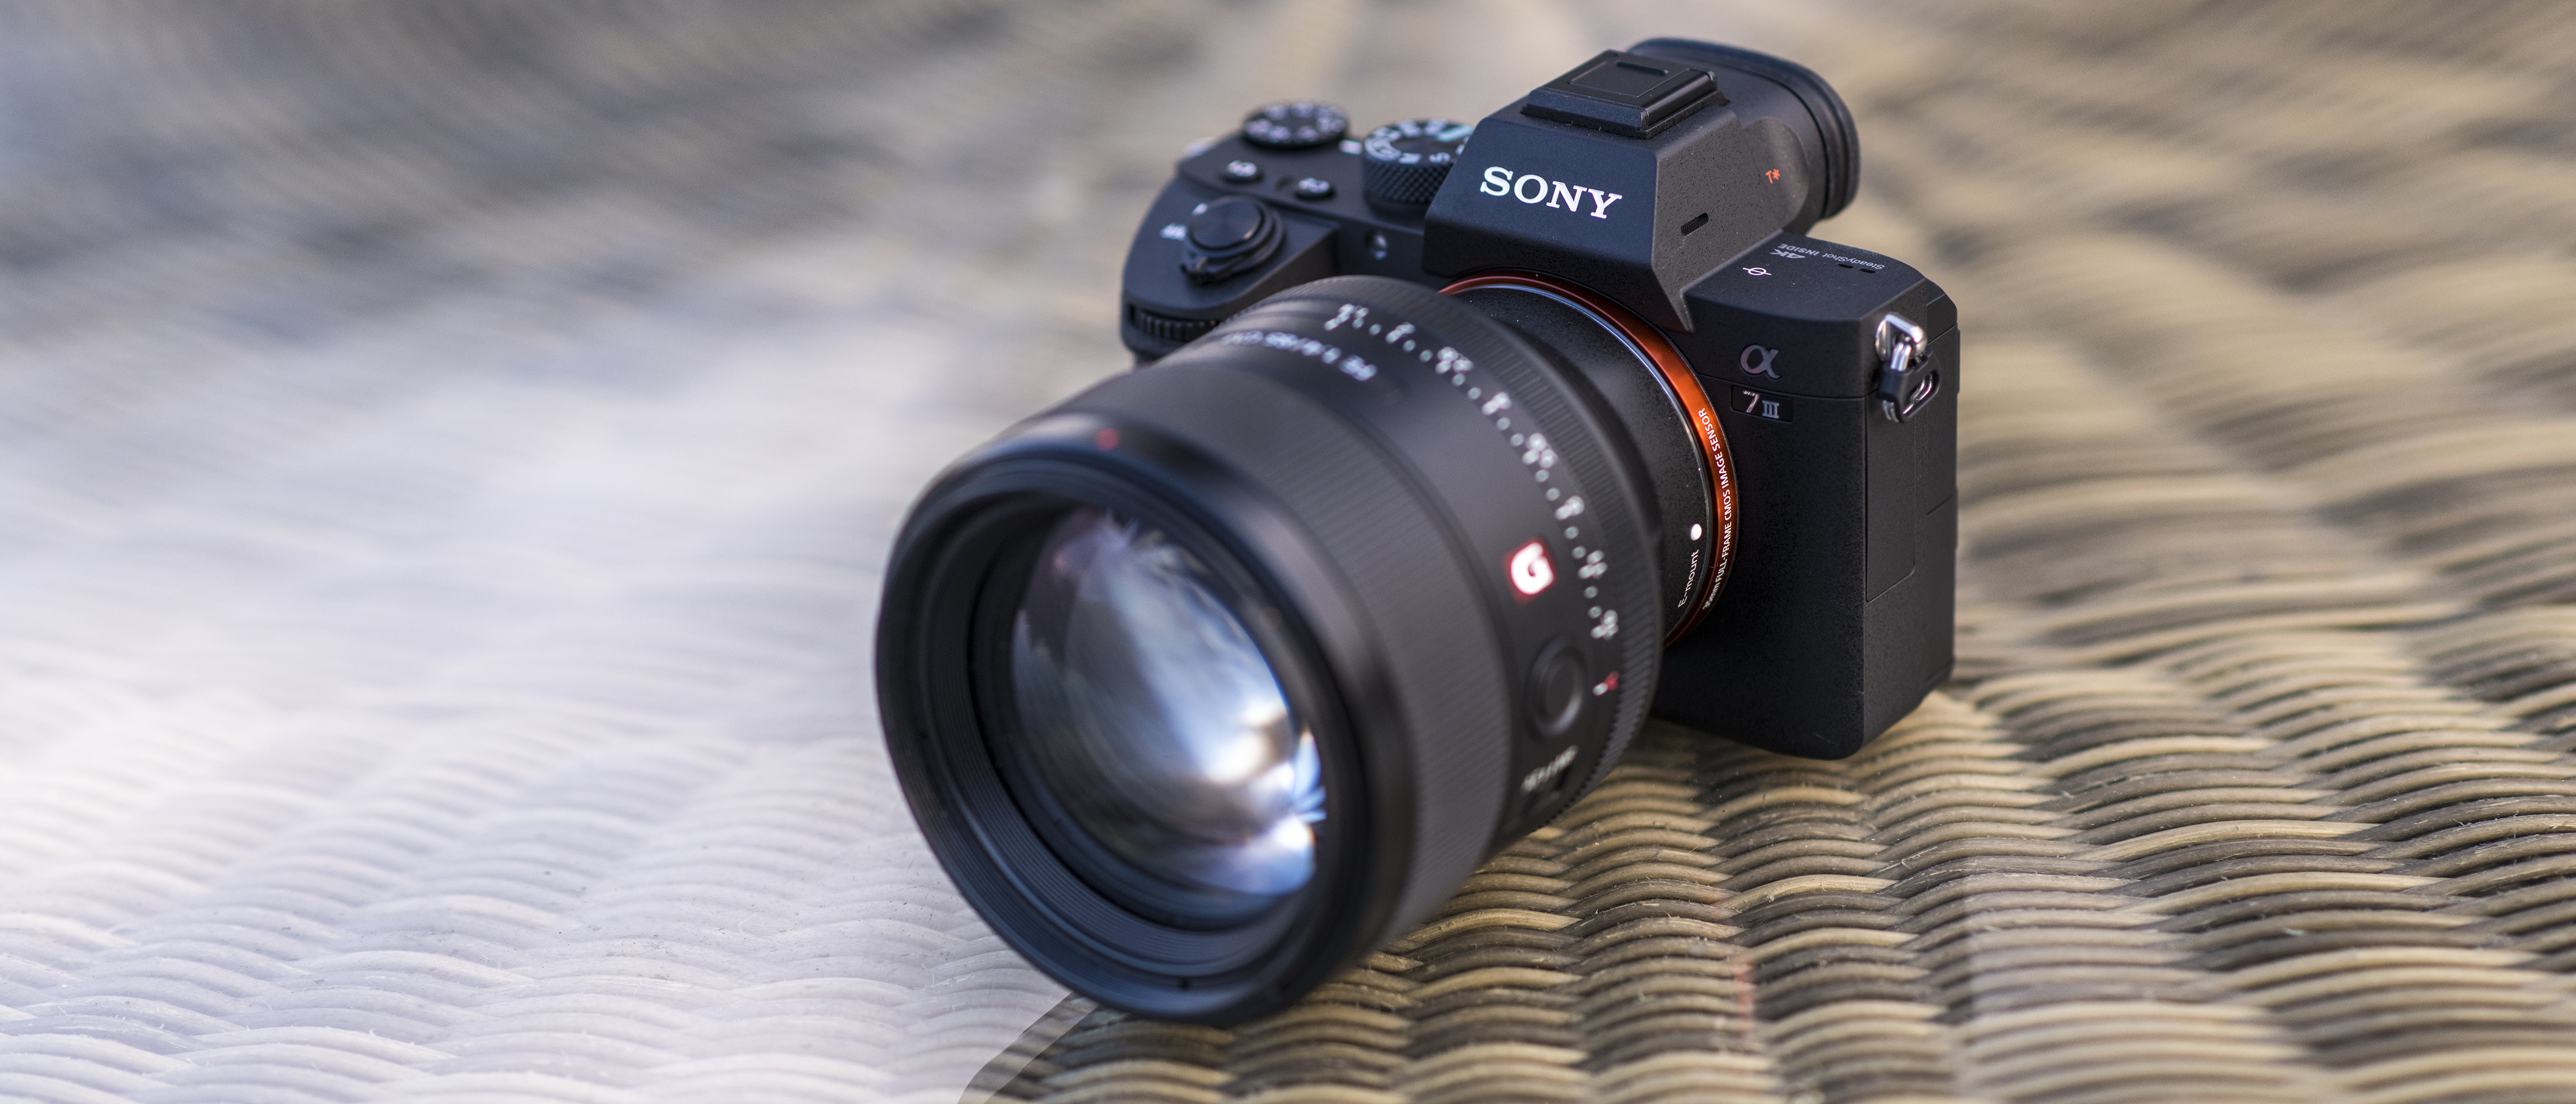 Sony Alpha A7 III Review: Bringing Pro Features To The Mainstream